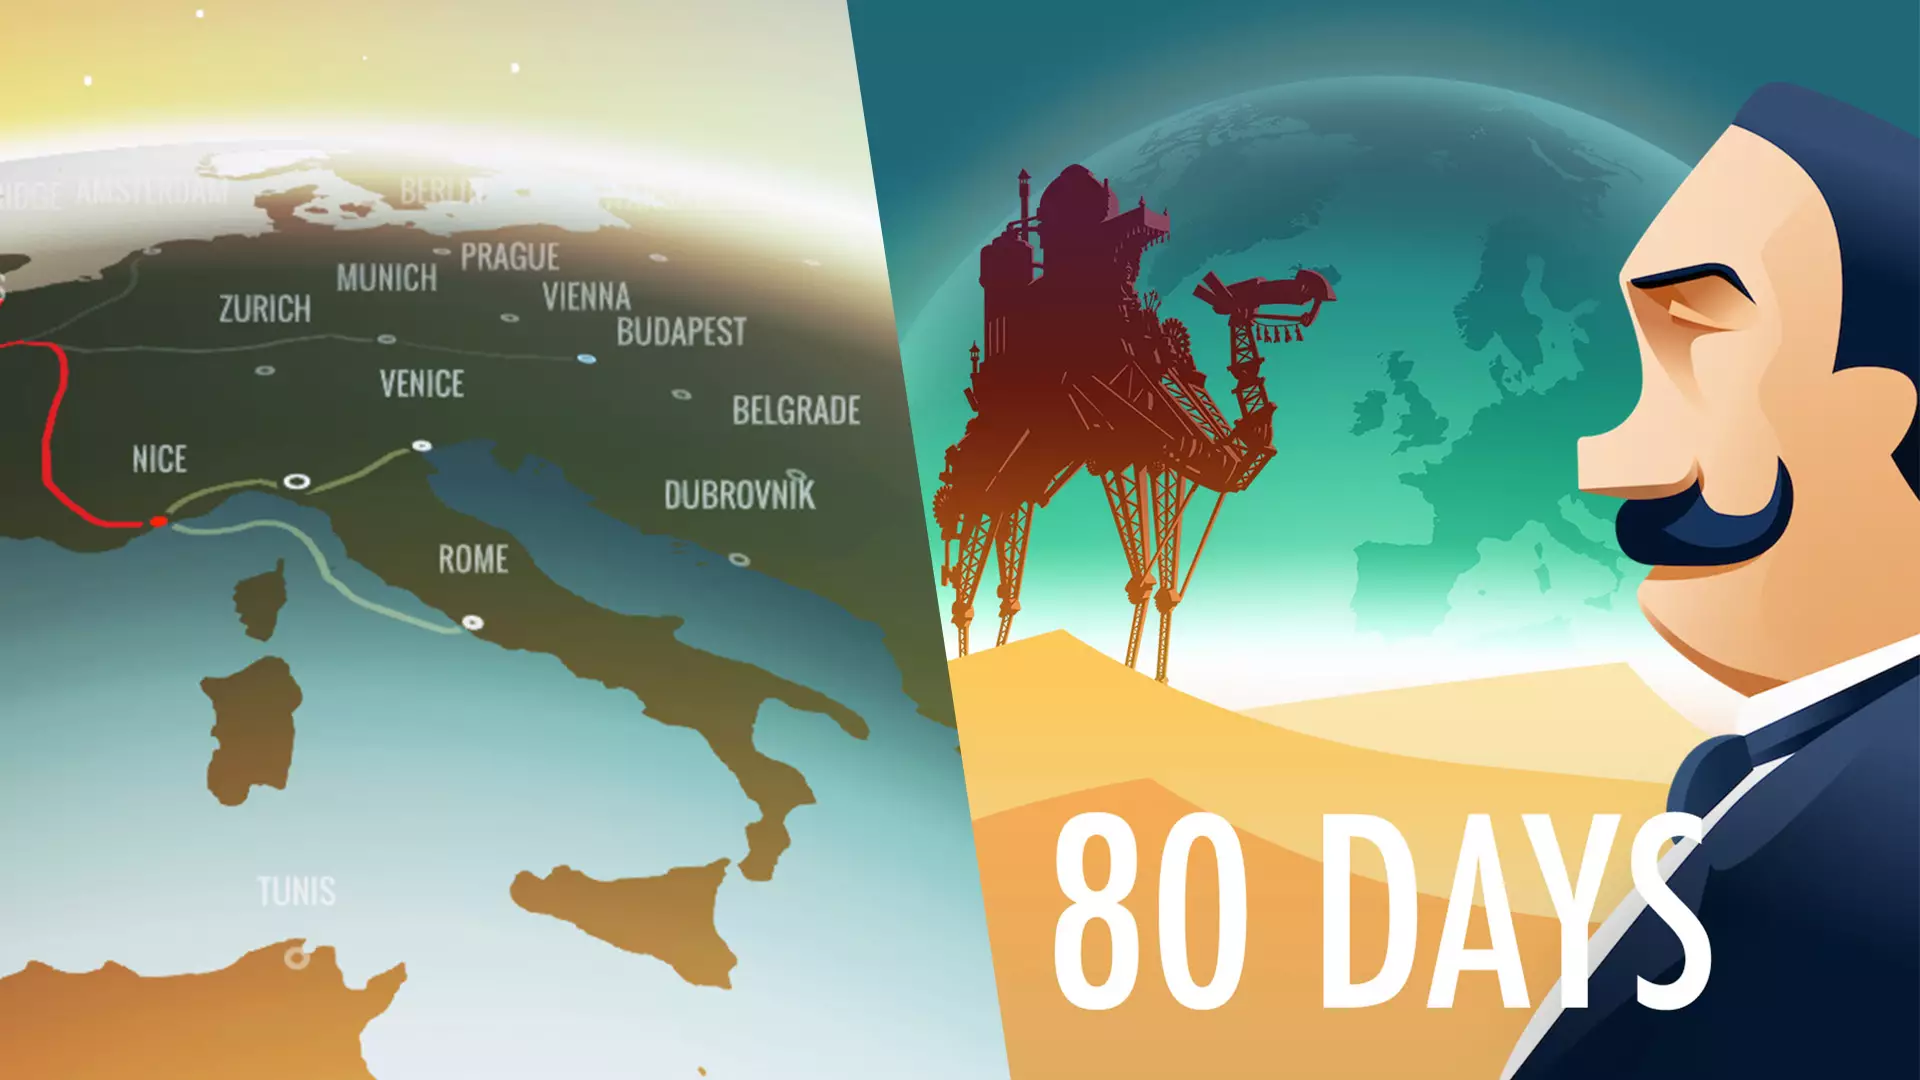 New To Nintendo Switch, '80 Days' Is A Loving Tribute To Jules Verne